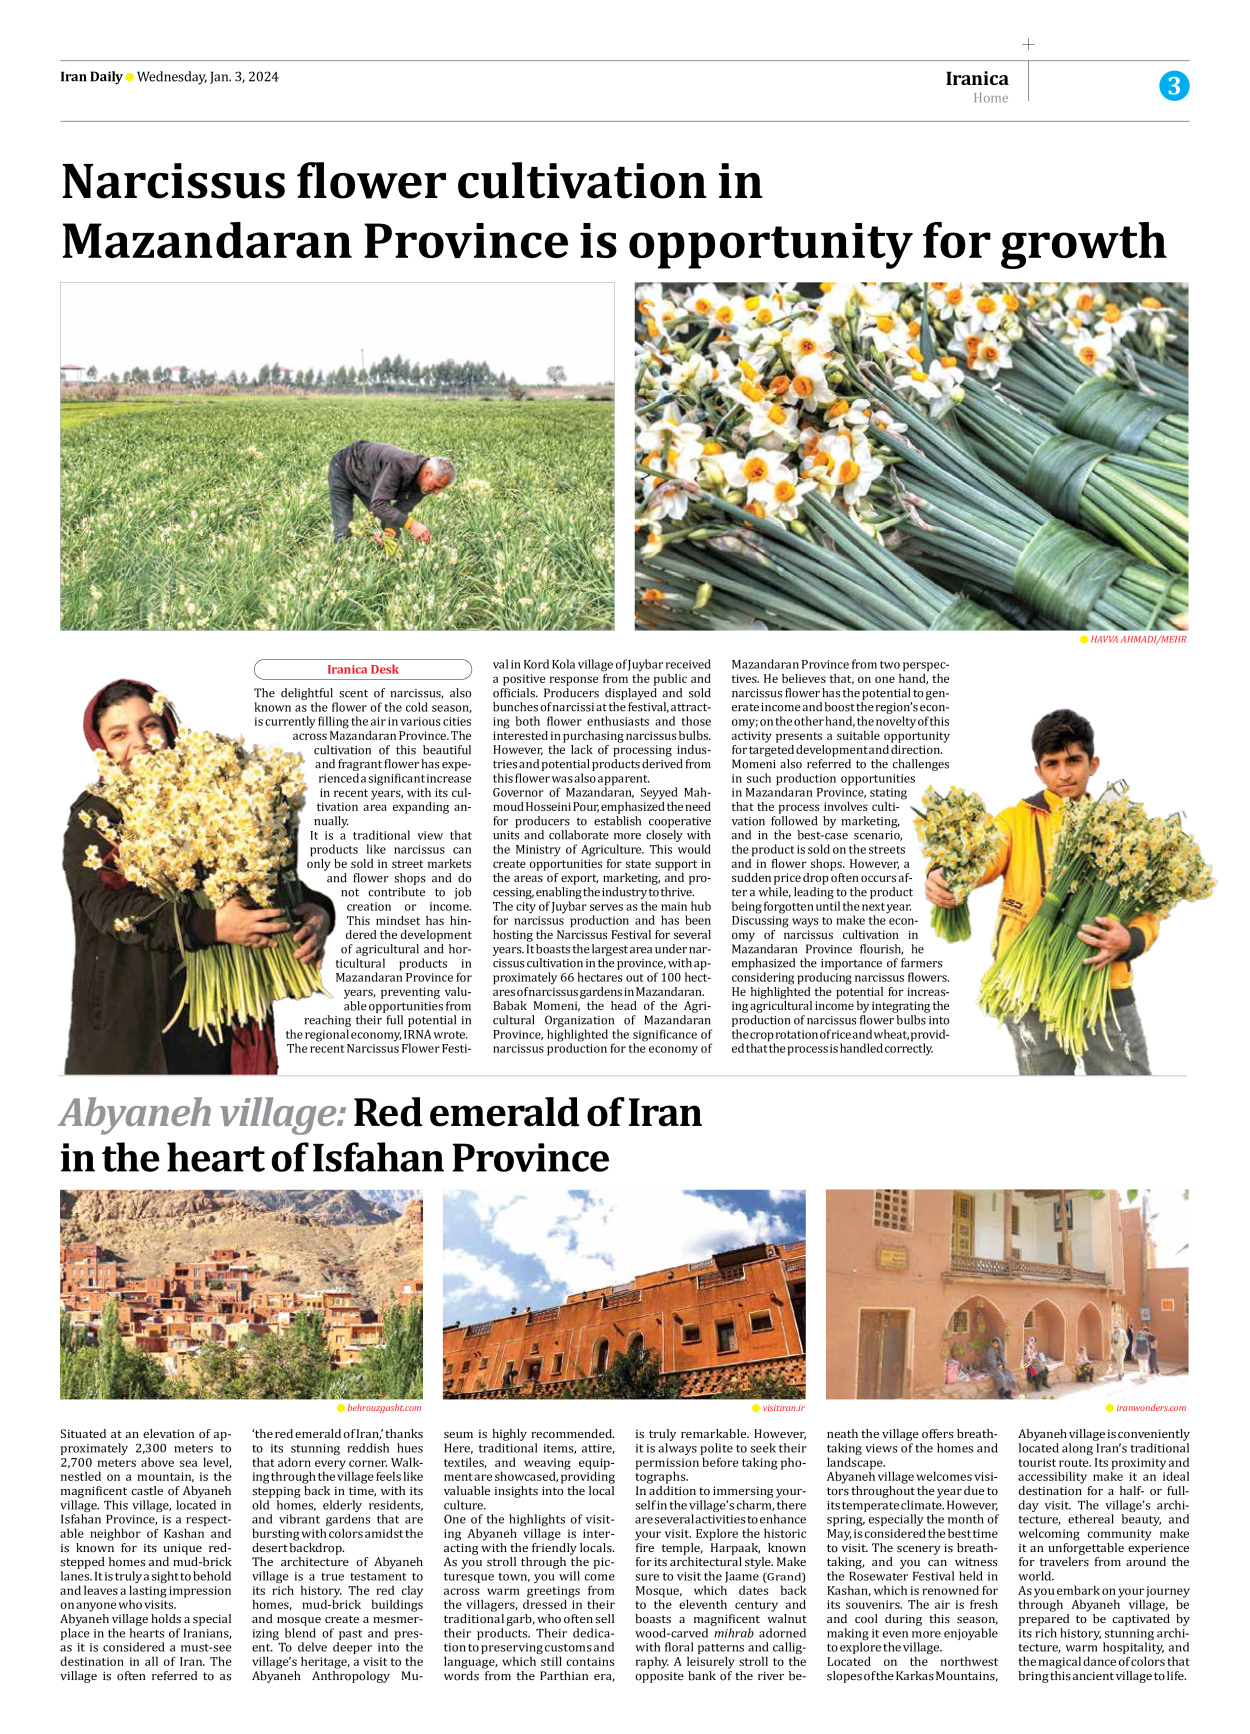 Iran Daily - Number Seven Thousand Four Hundred and Seventy Five - 03 January 2024 - Page 3